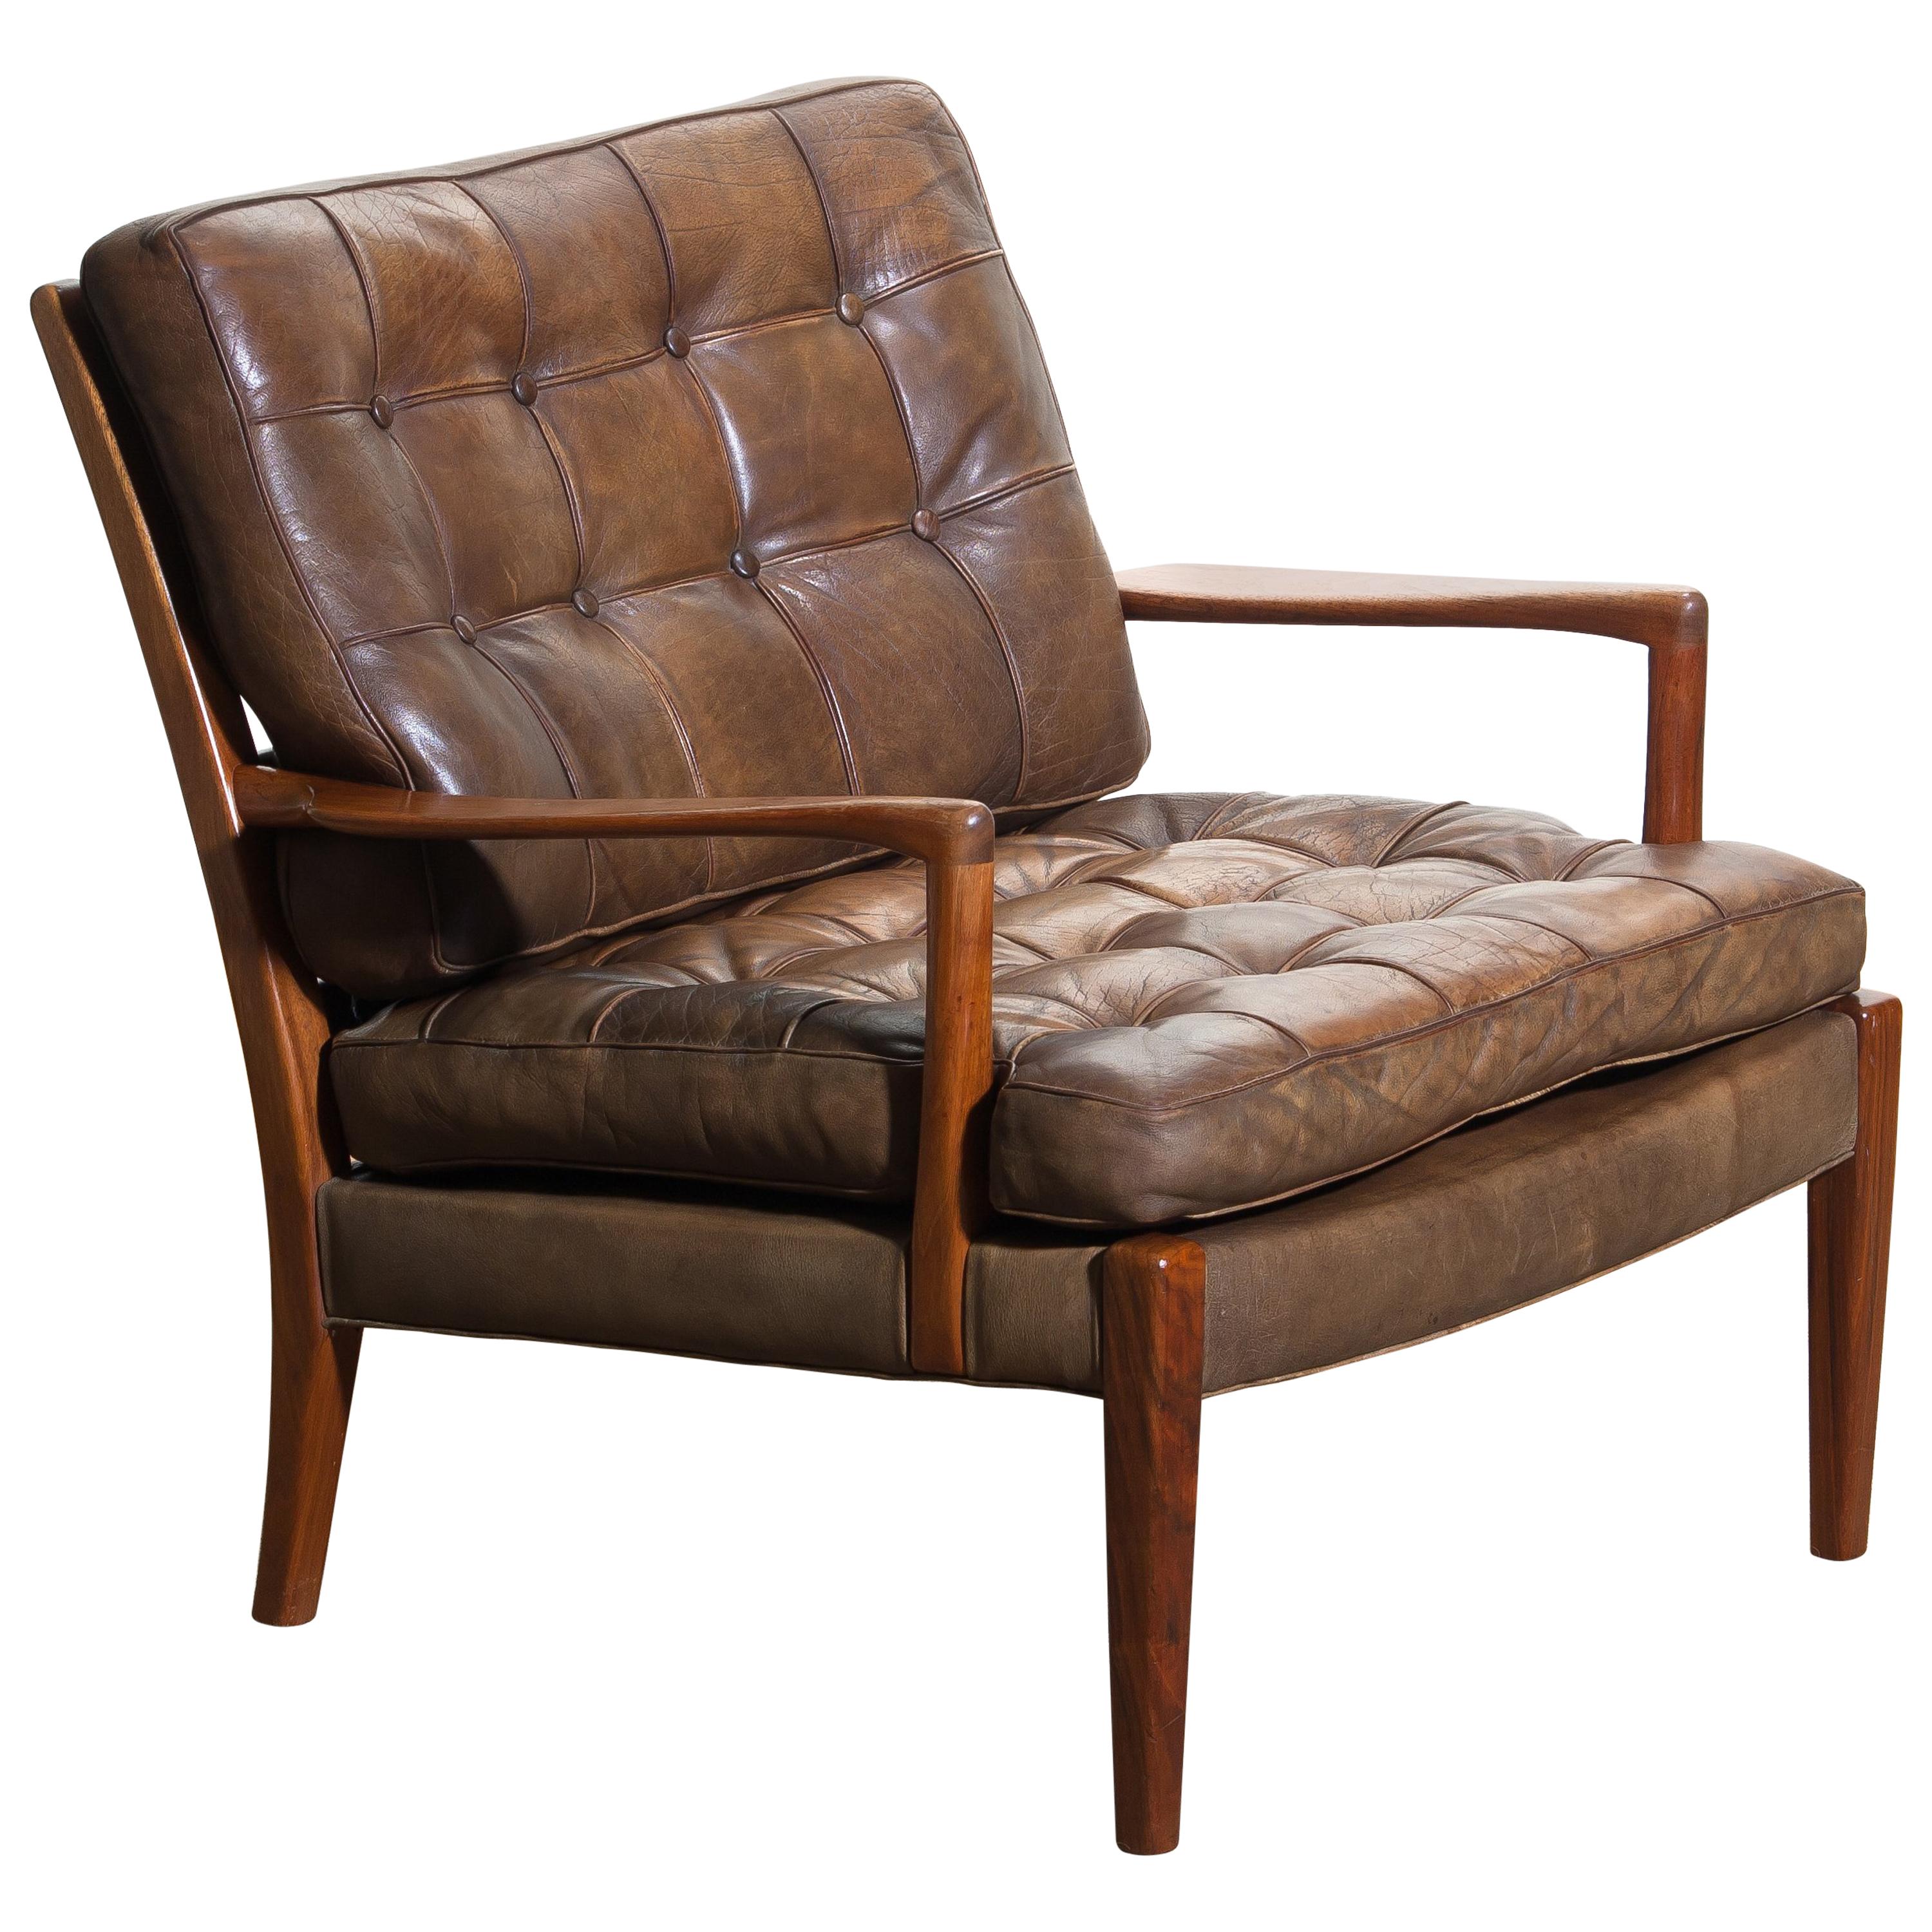 1960s Walnut / Leather Easy / Lounge Chair Model "Loven" by Arne Norell Sweden